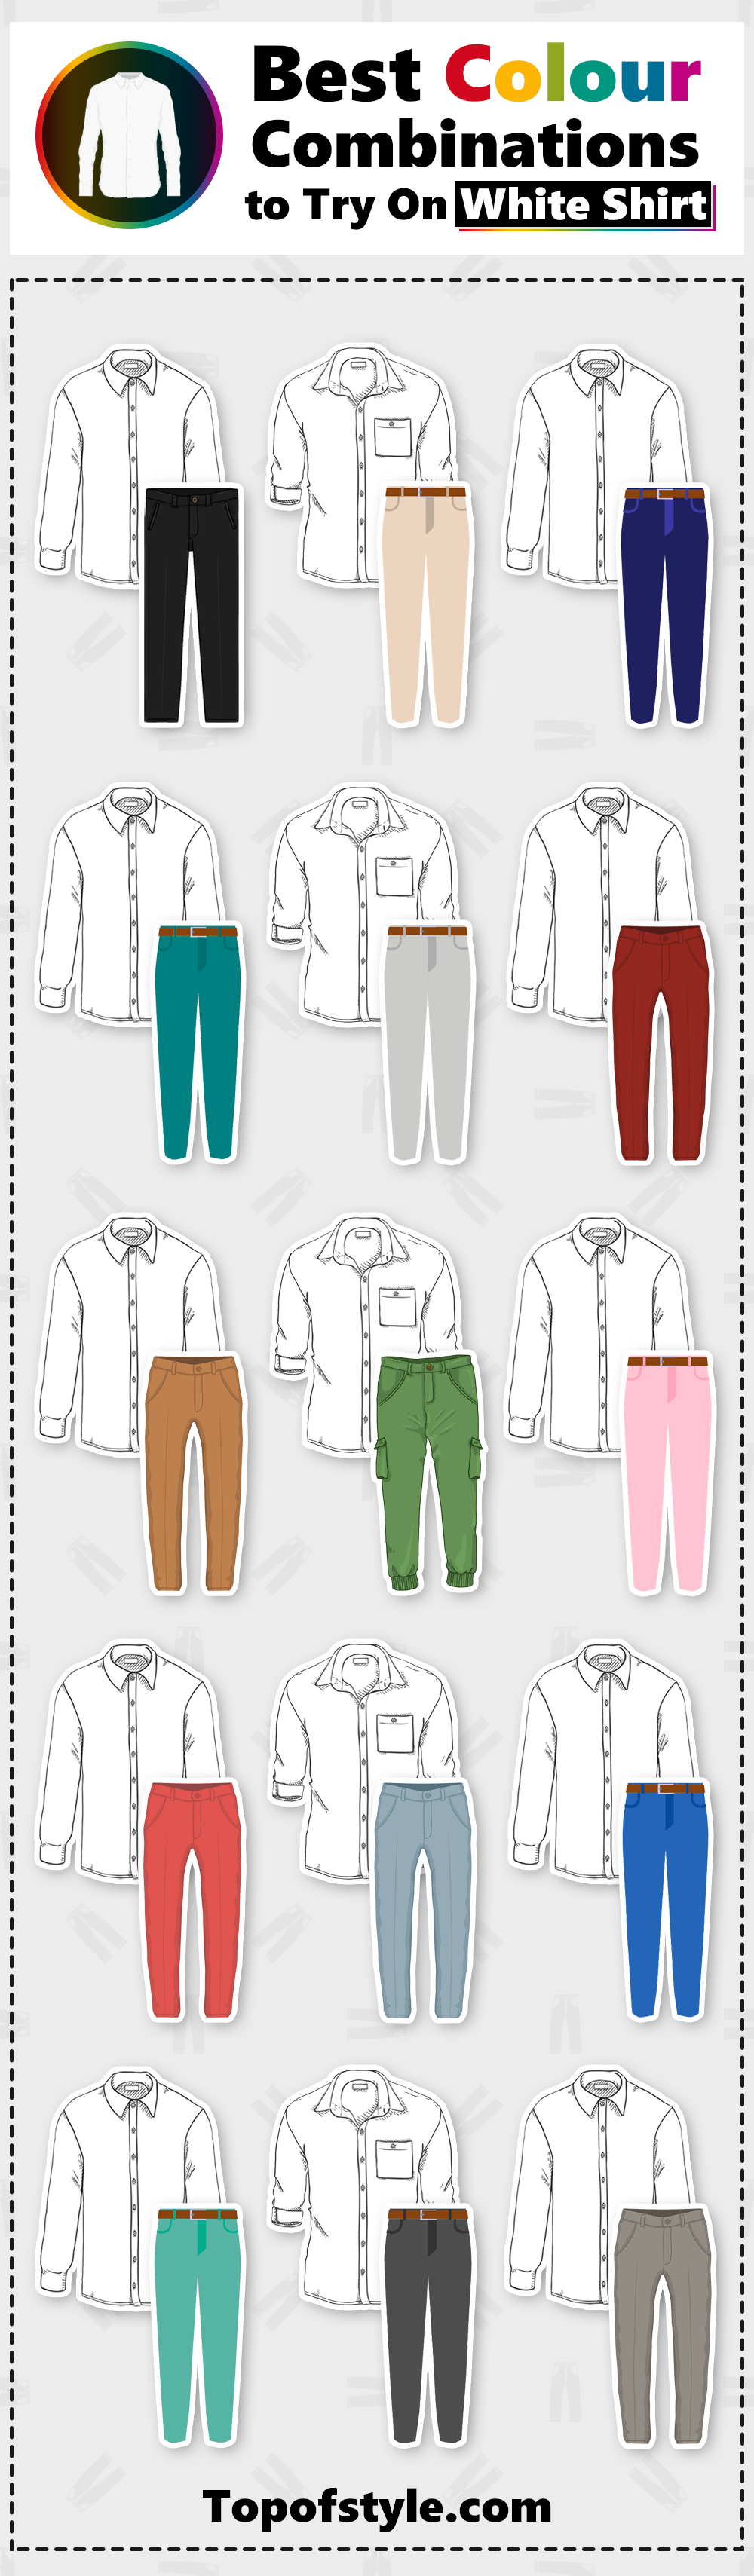 Mens Clothes Best Formal Shirt Pants Colour Combinations Matching Dress Shirts  Trousers  YouTube